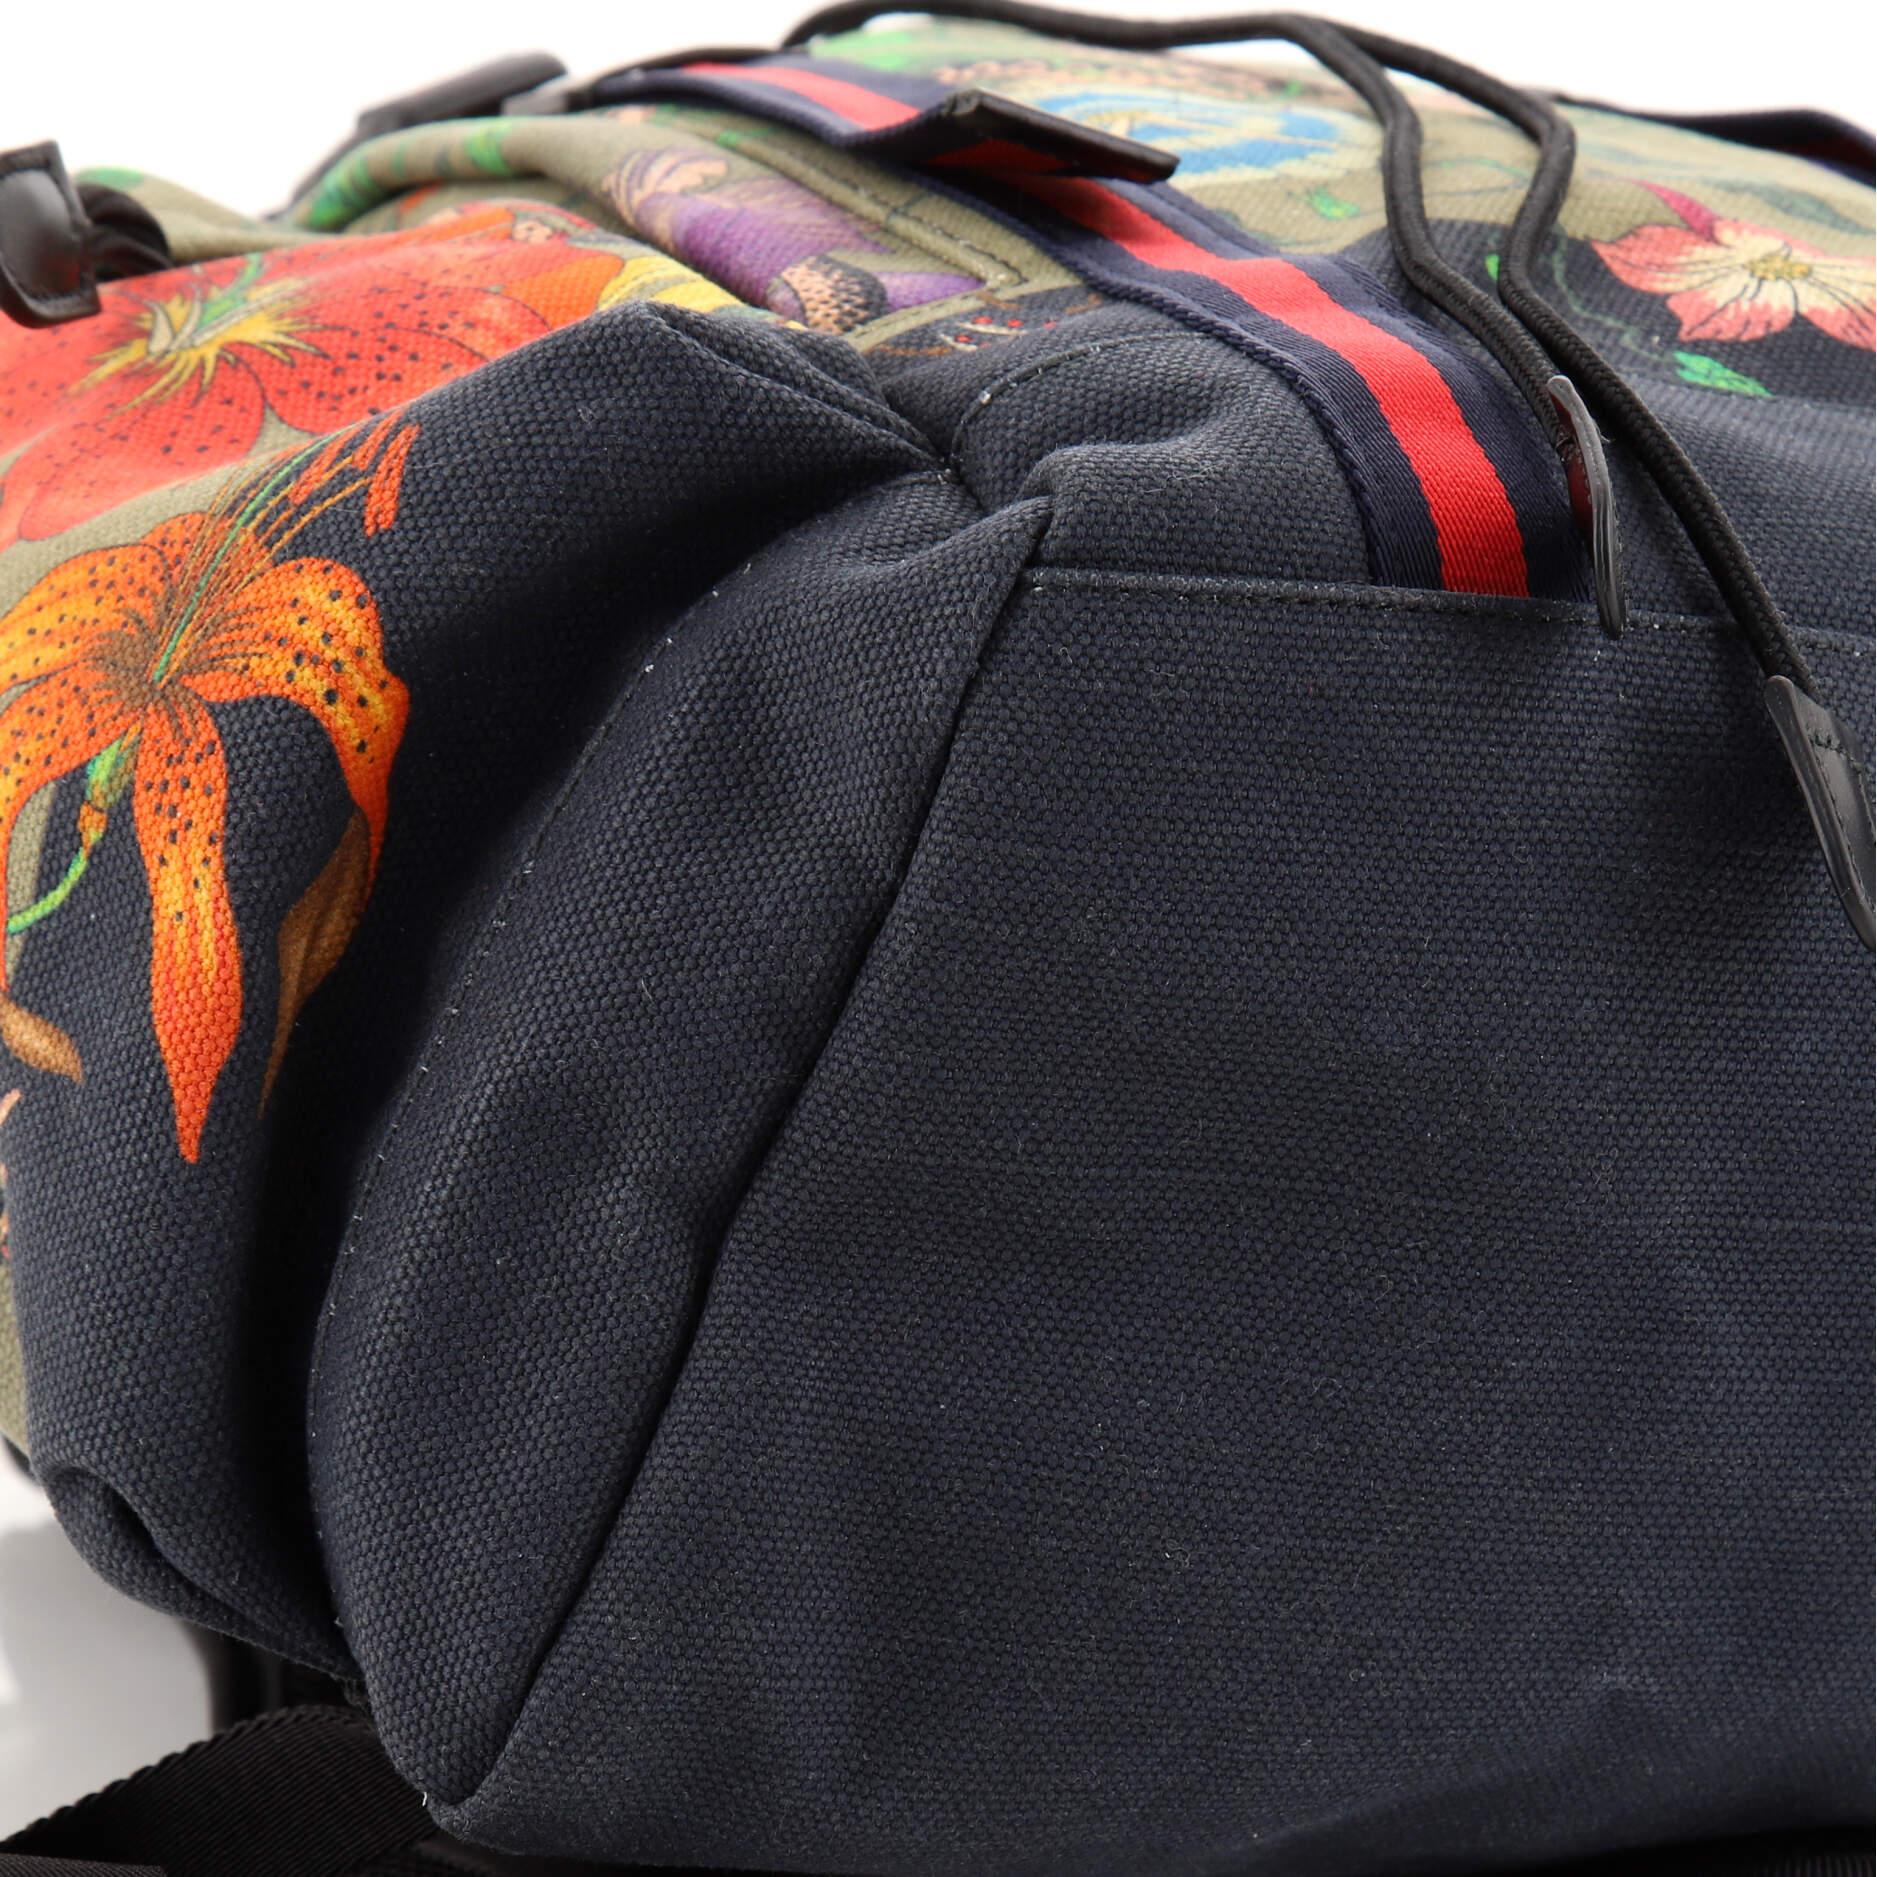 Women's or Men's Gucci Techpack Backpack Printed Canvas